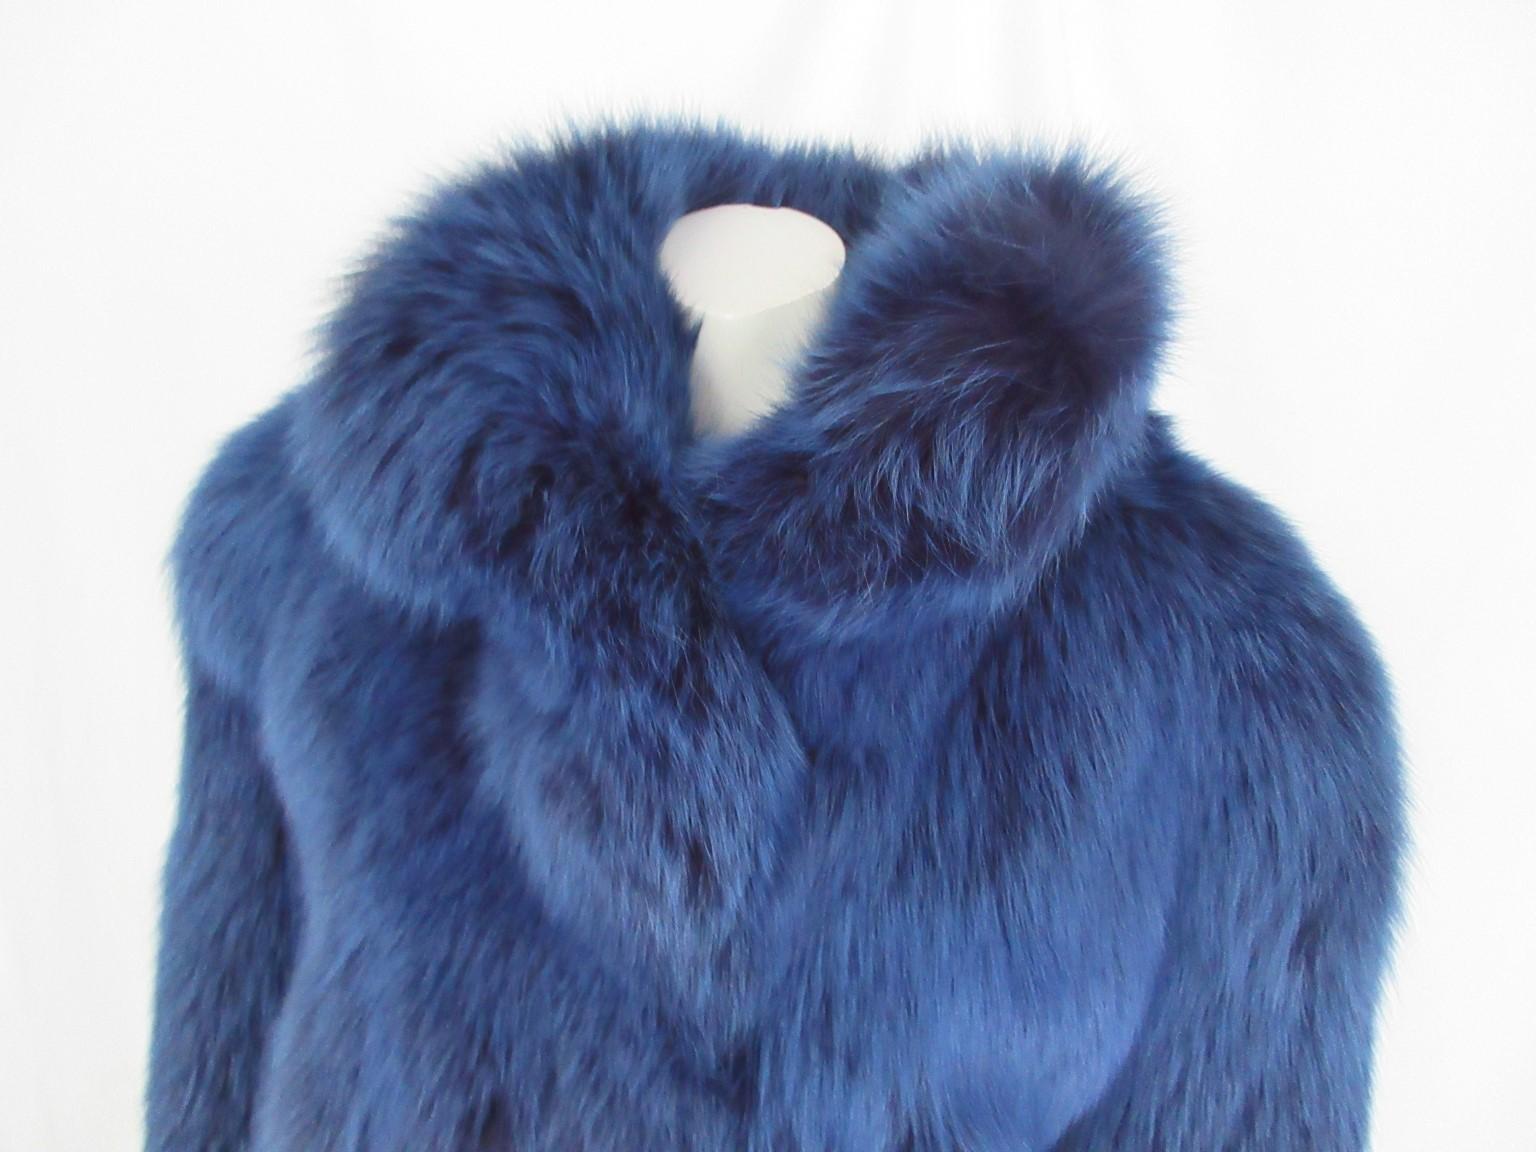 Beautiful blue dyed fox fur coat, rare to find

We offer more exclusive fur items, view our frontstore

Details:
Soft fox fur
2 pockets and 3 closing hooks.
Can be worn by men or women.

Pristine condition 
Size is about medium to large , see